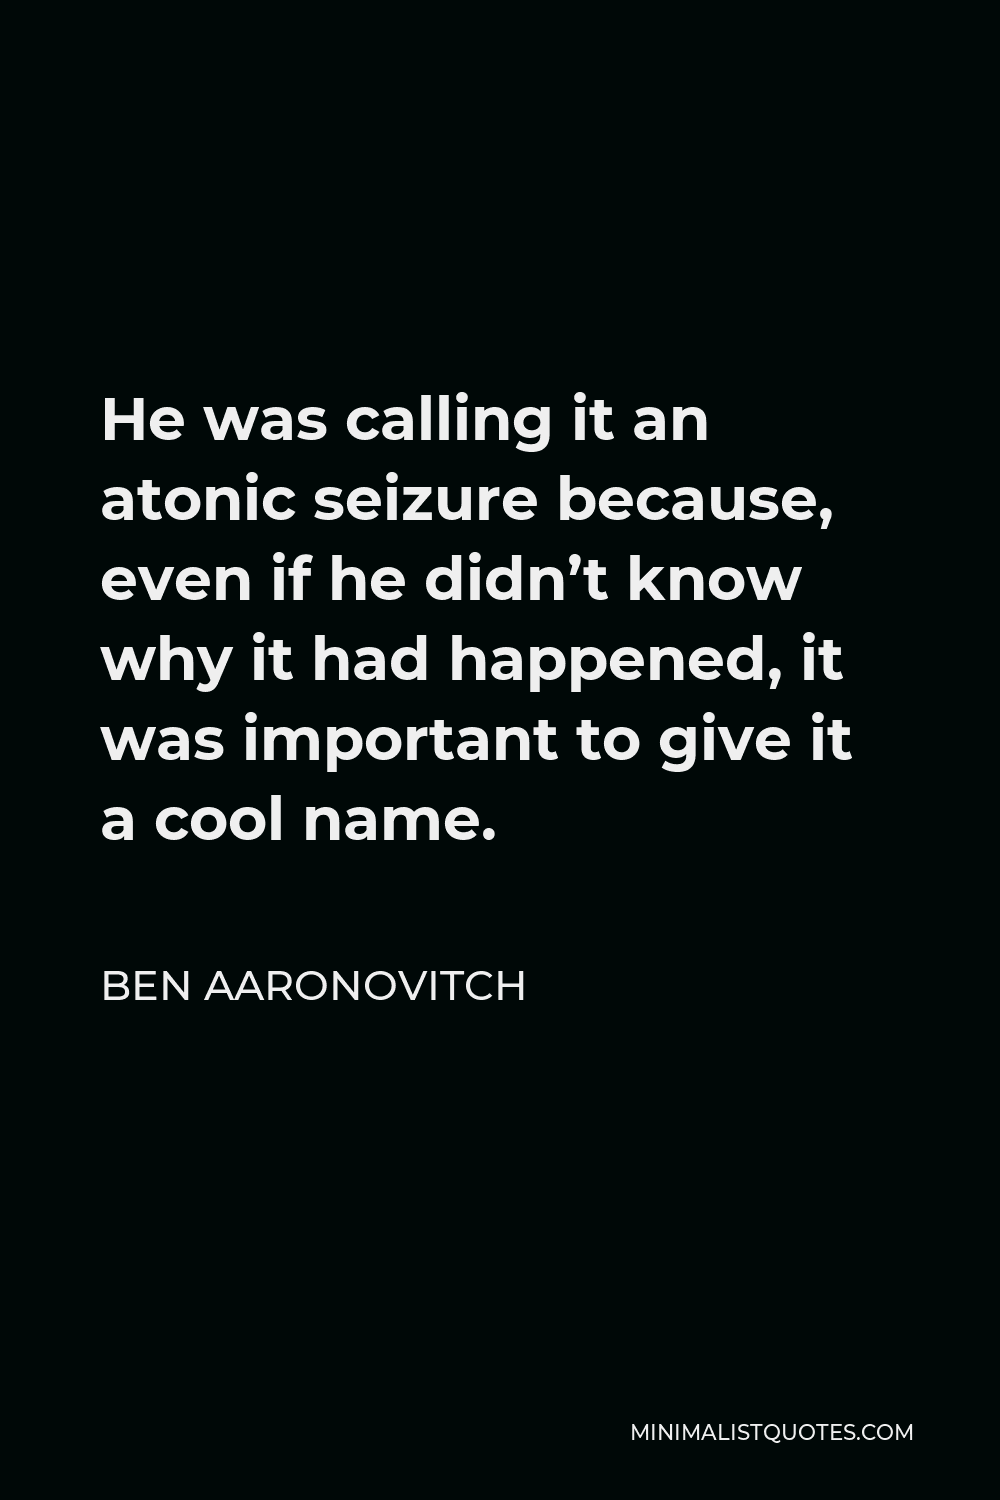 Ben Aaronovitch Quote - He was calling it an atonic seizure because, even if he didn’t know why it had happened, it was important to give it a cool name.